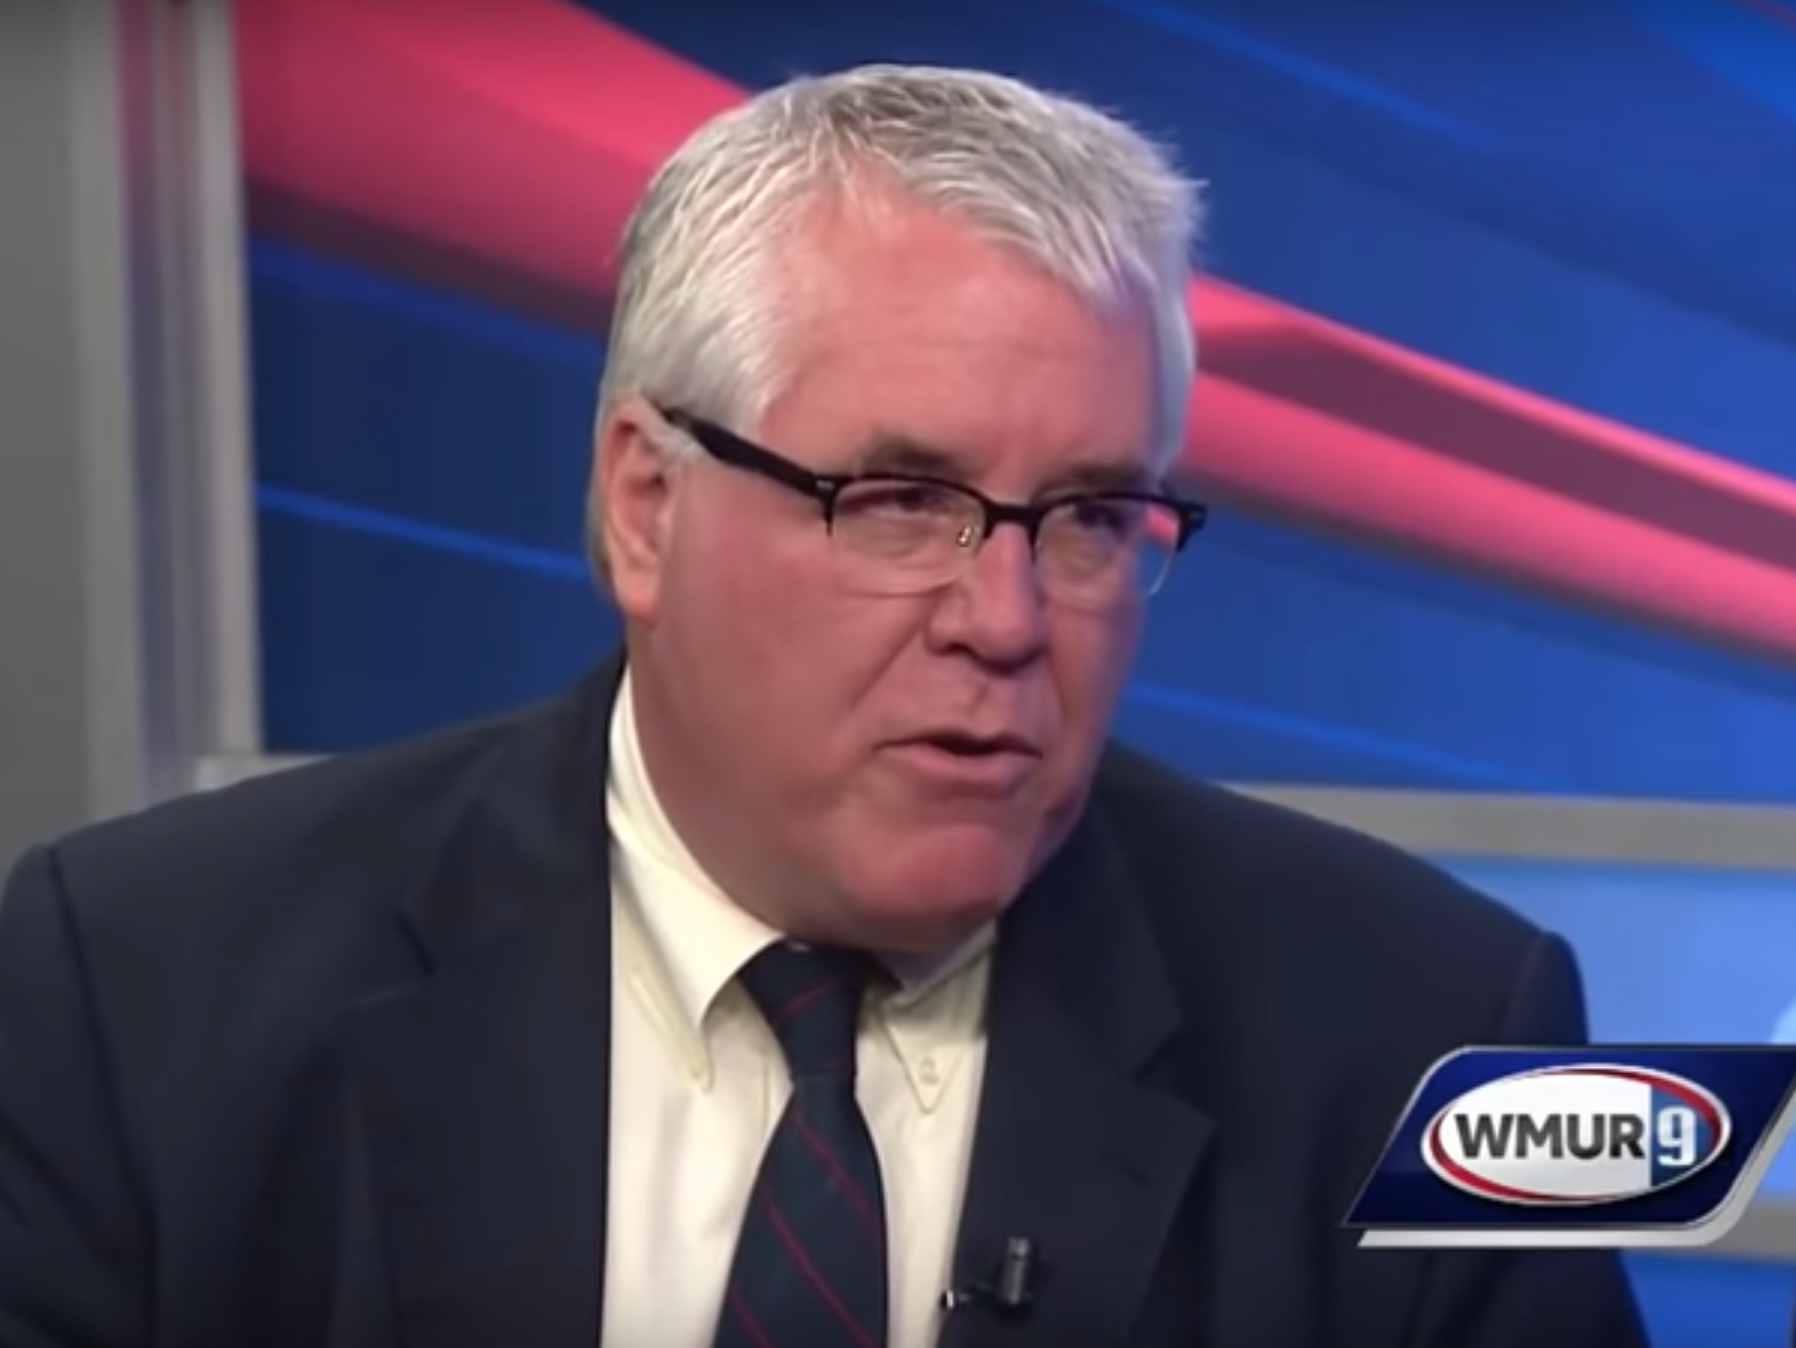 New Hampshire Senator Jeff Woodburn has been arrested on charges of domestic violence